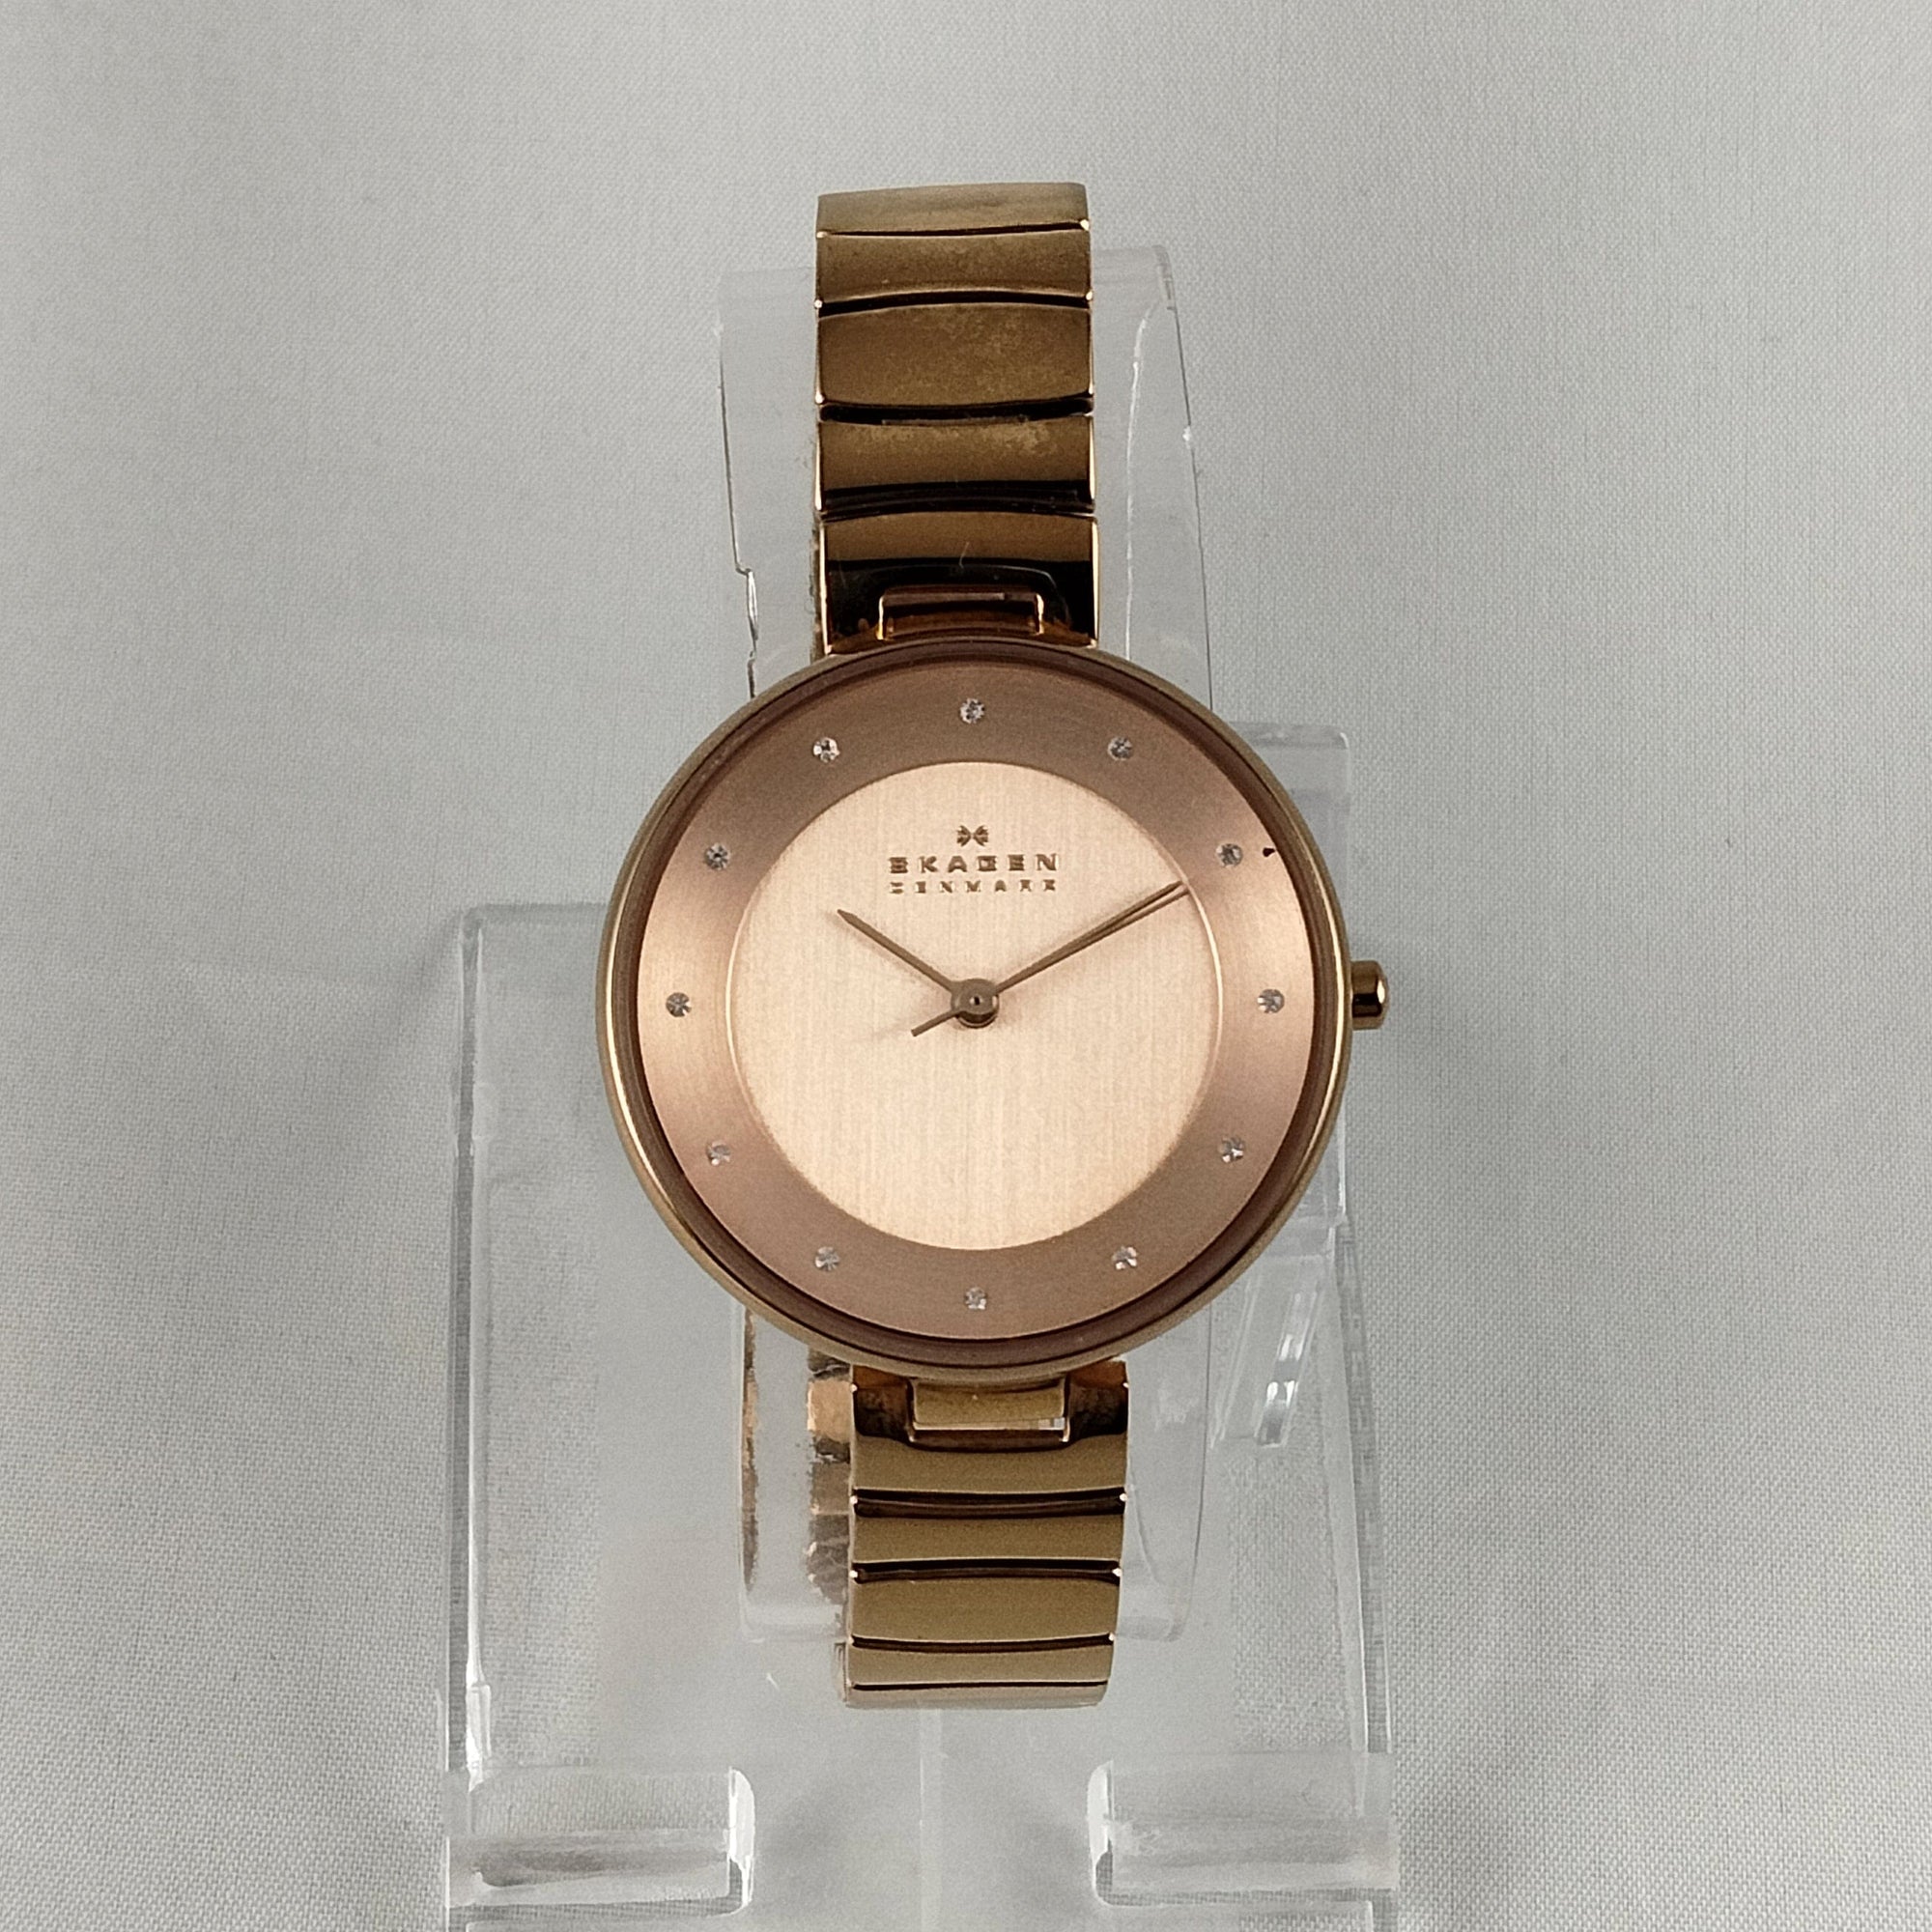 I Like Mikes Mid Century Modern Watches Skagen Women's Stainless Steel Gold Tone Watch, Rose Gold Tone Dial, Jewel Hour Markers, Bracelet Strap